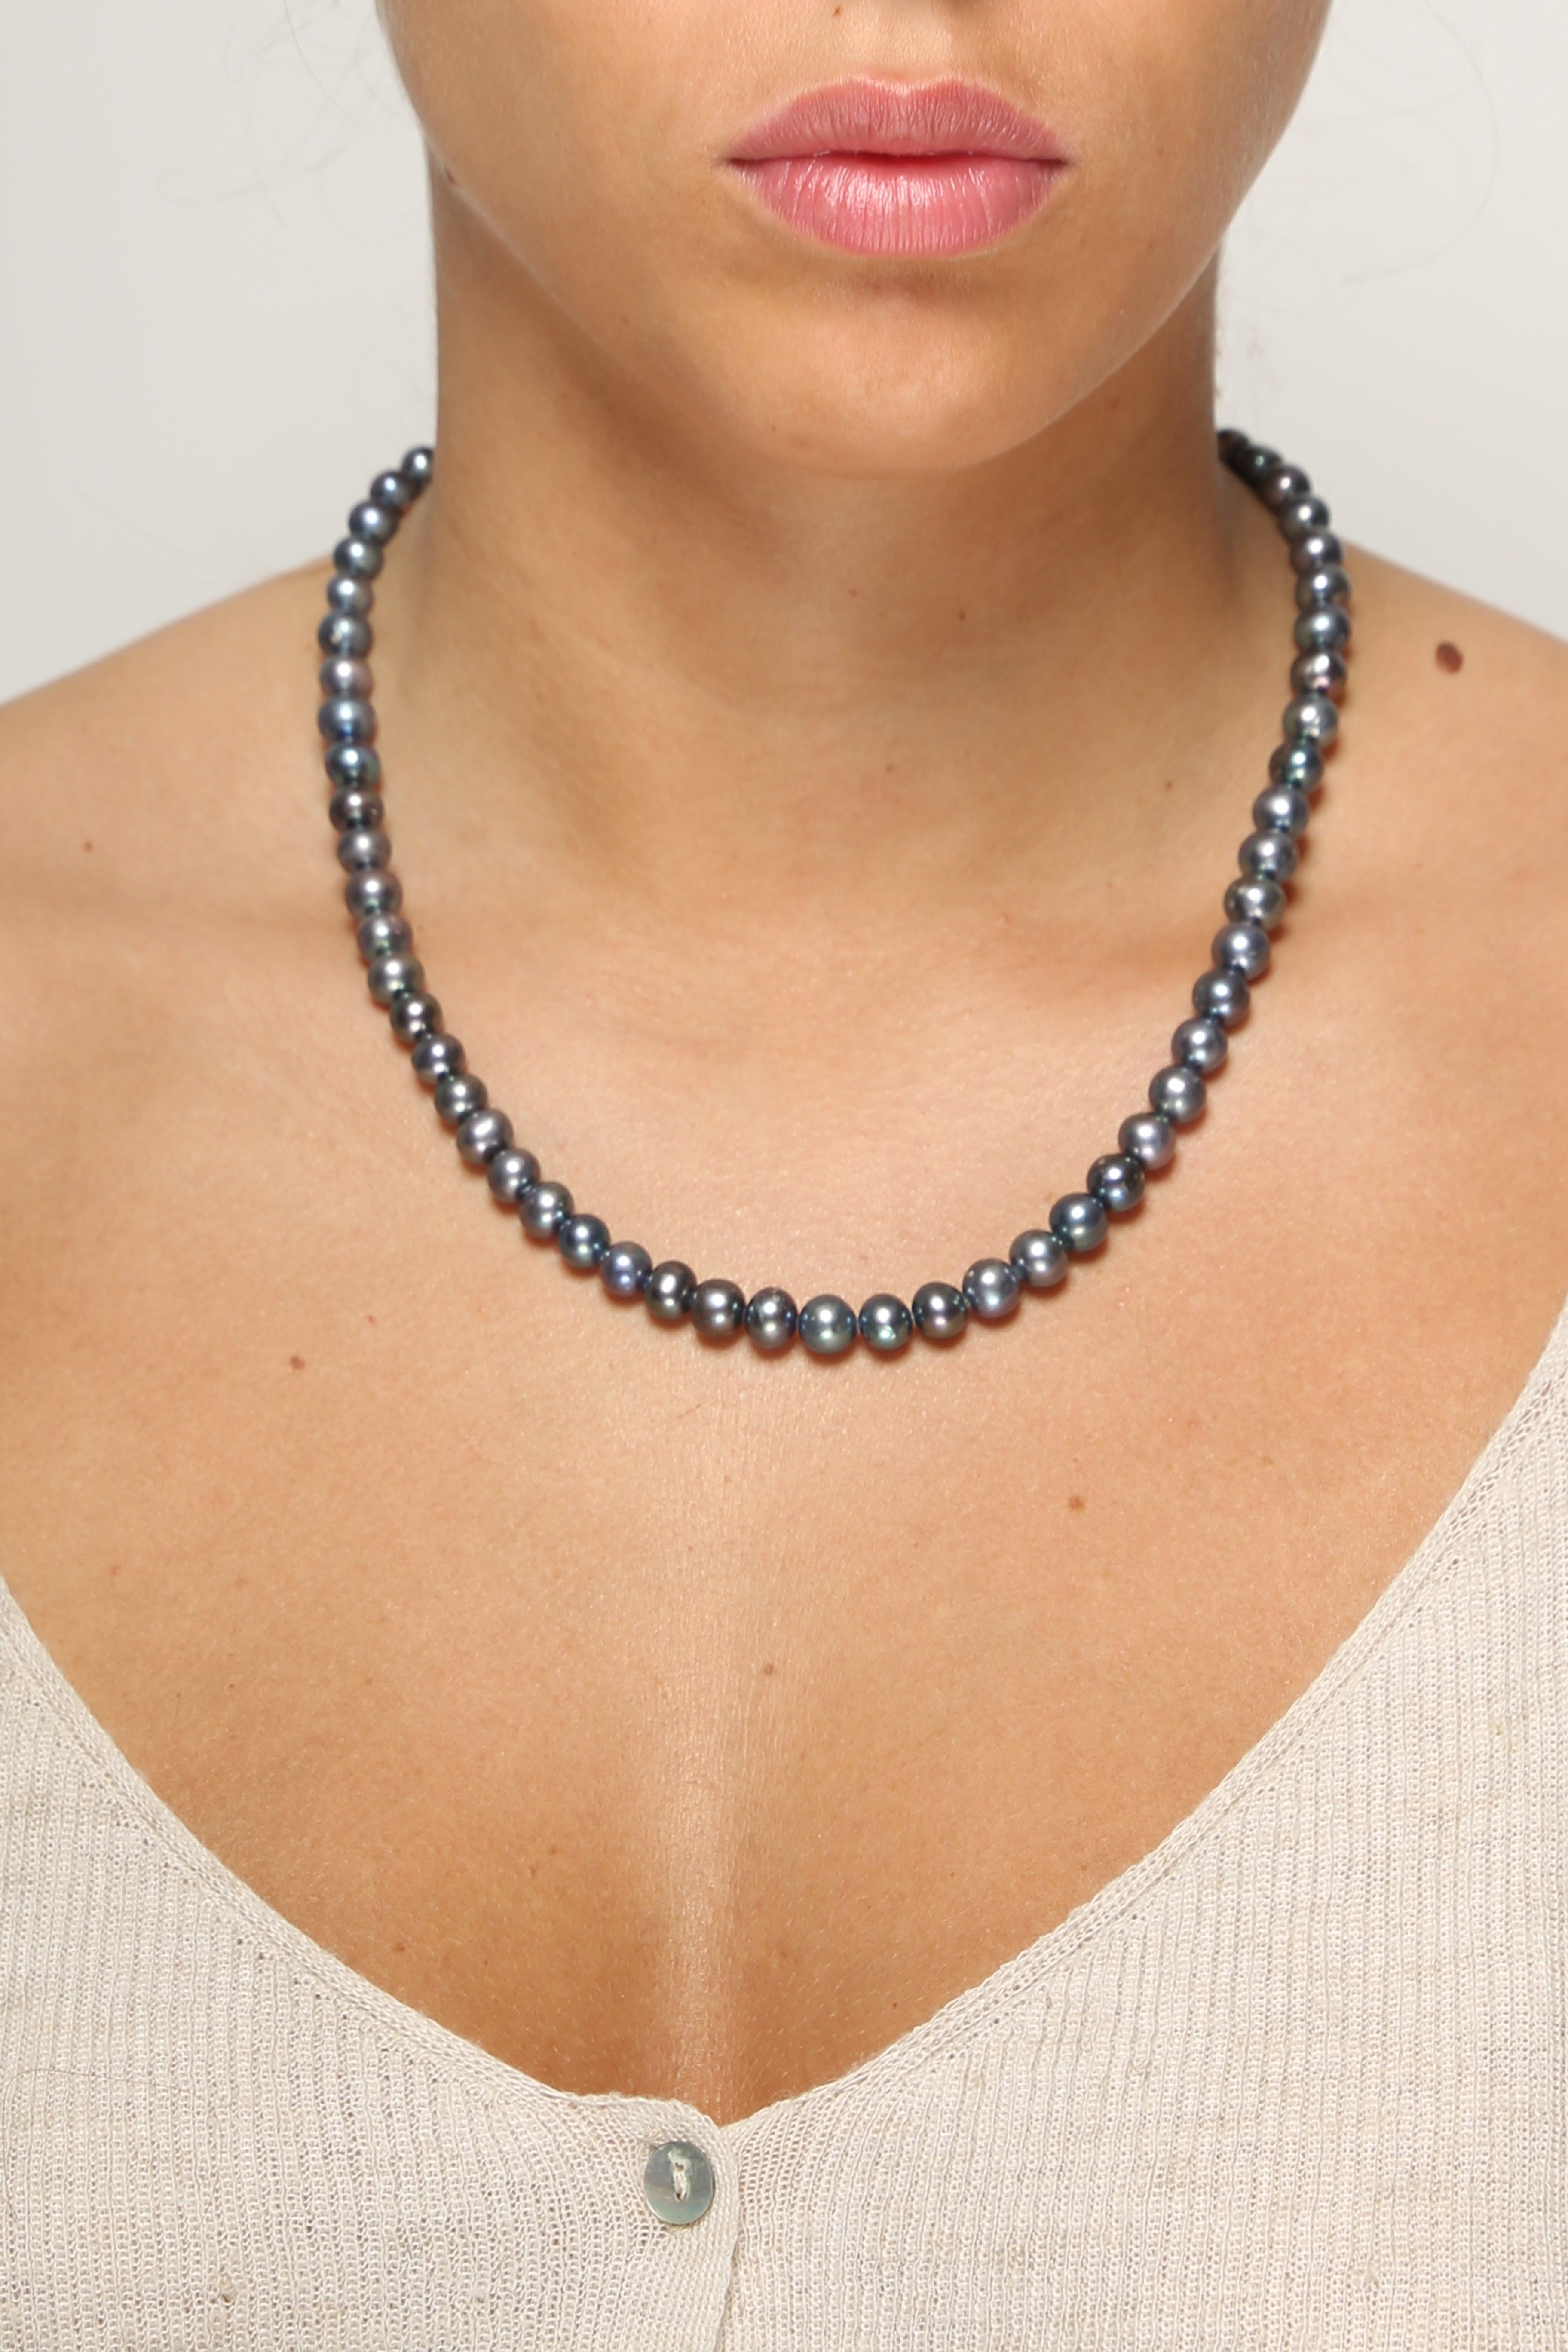 Jewellery Sets | Navy Blue Pearl Necklace | Freeup